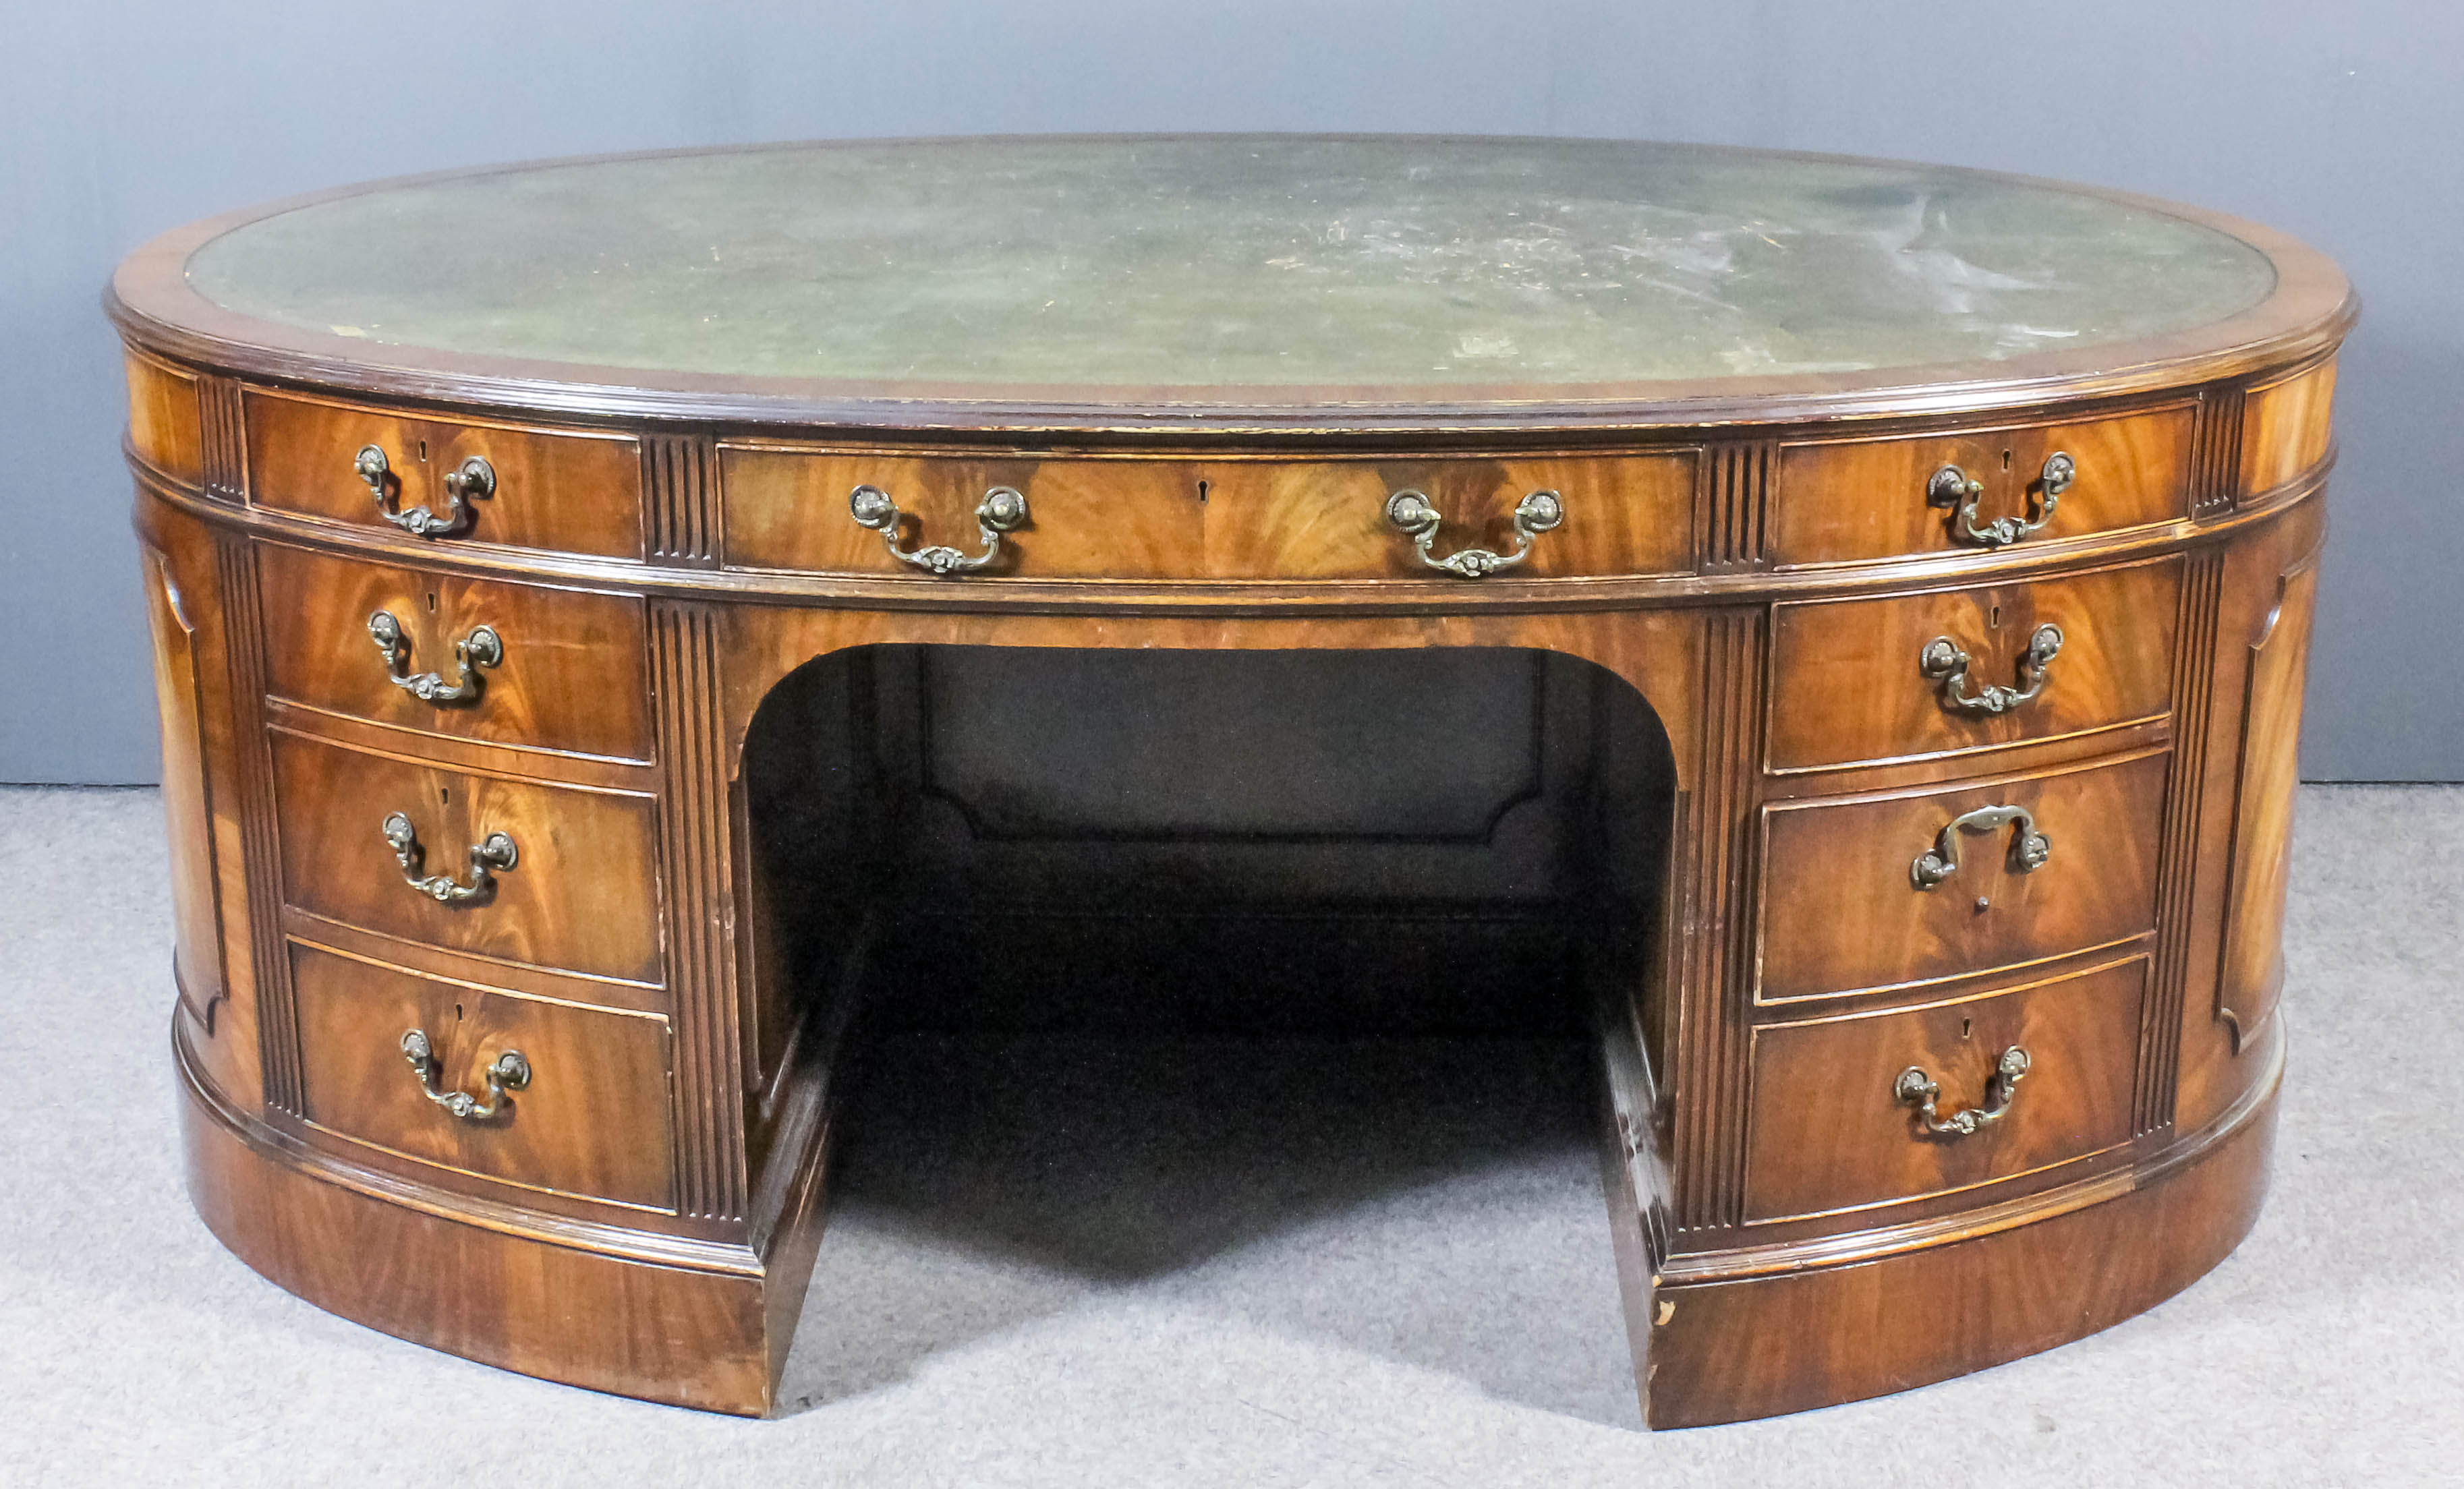 A mahogany oval kneehole partners desk of "Georgian" design with moulded edge to top and fluted